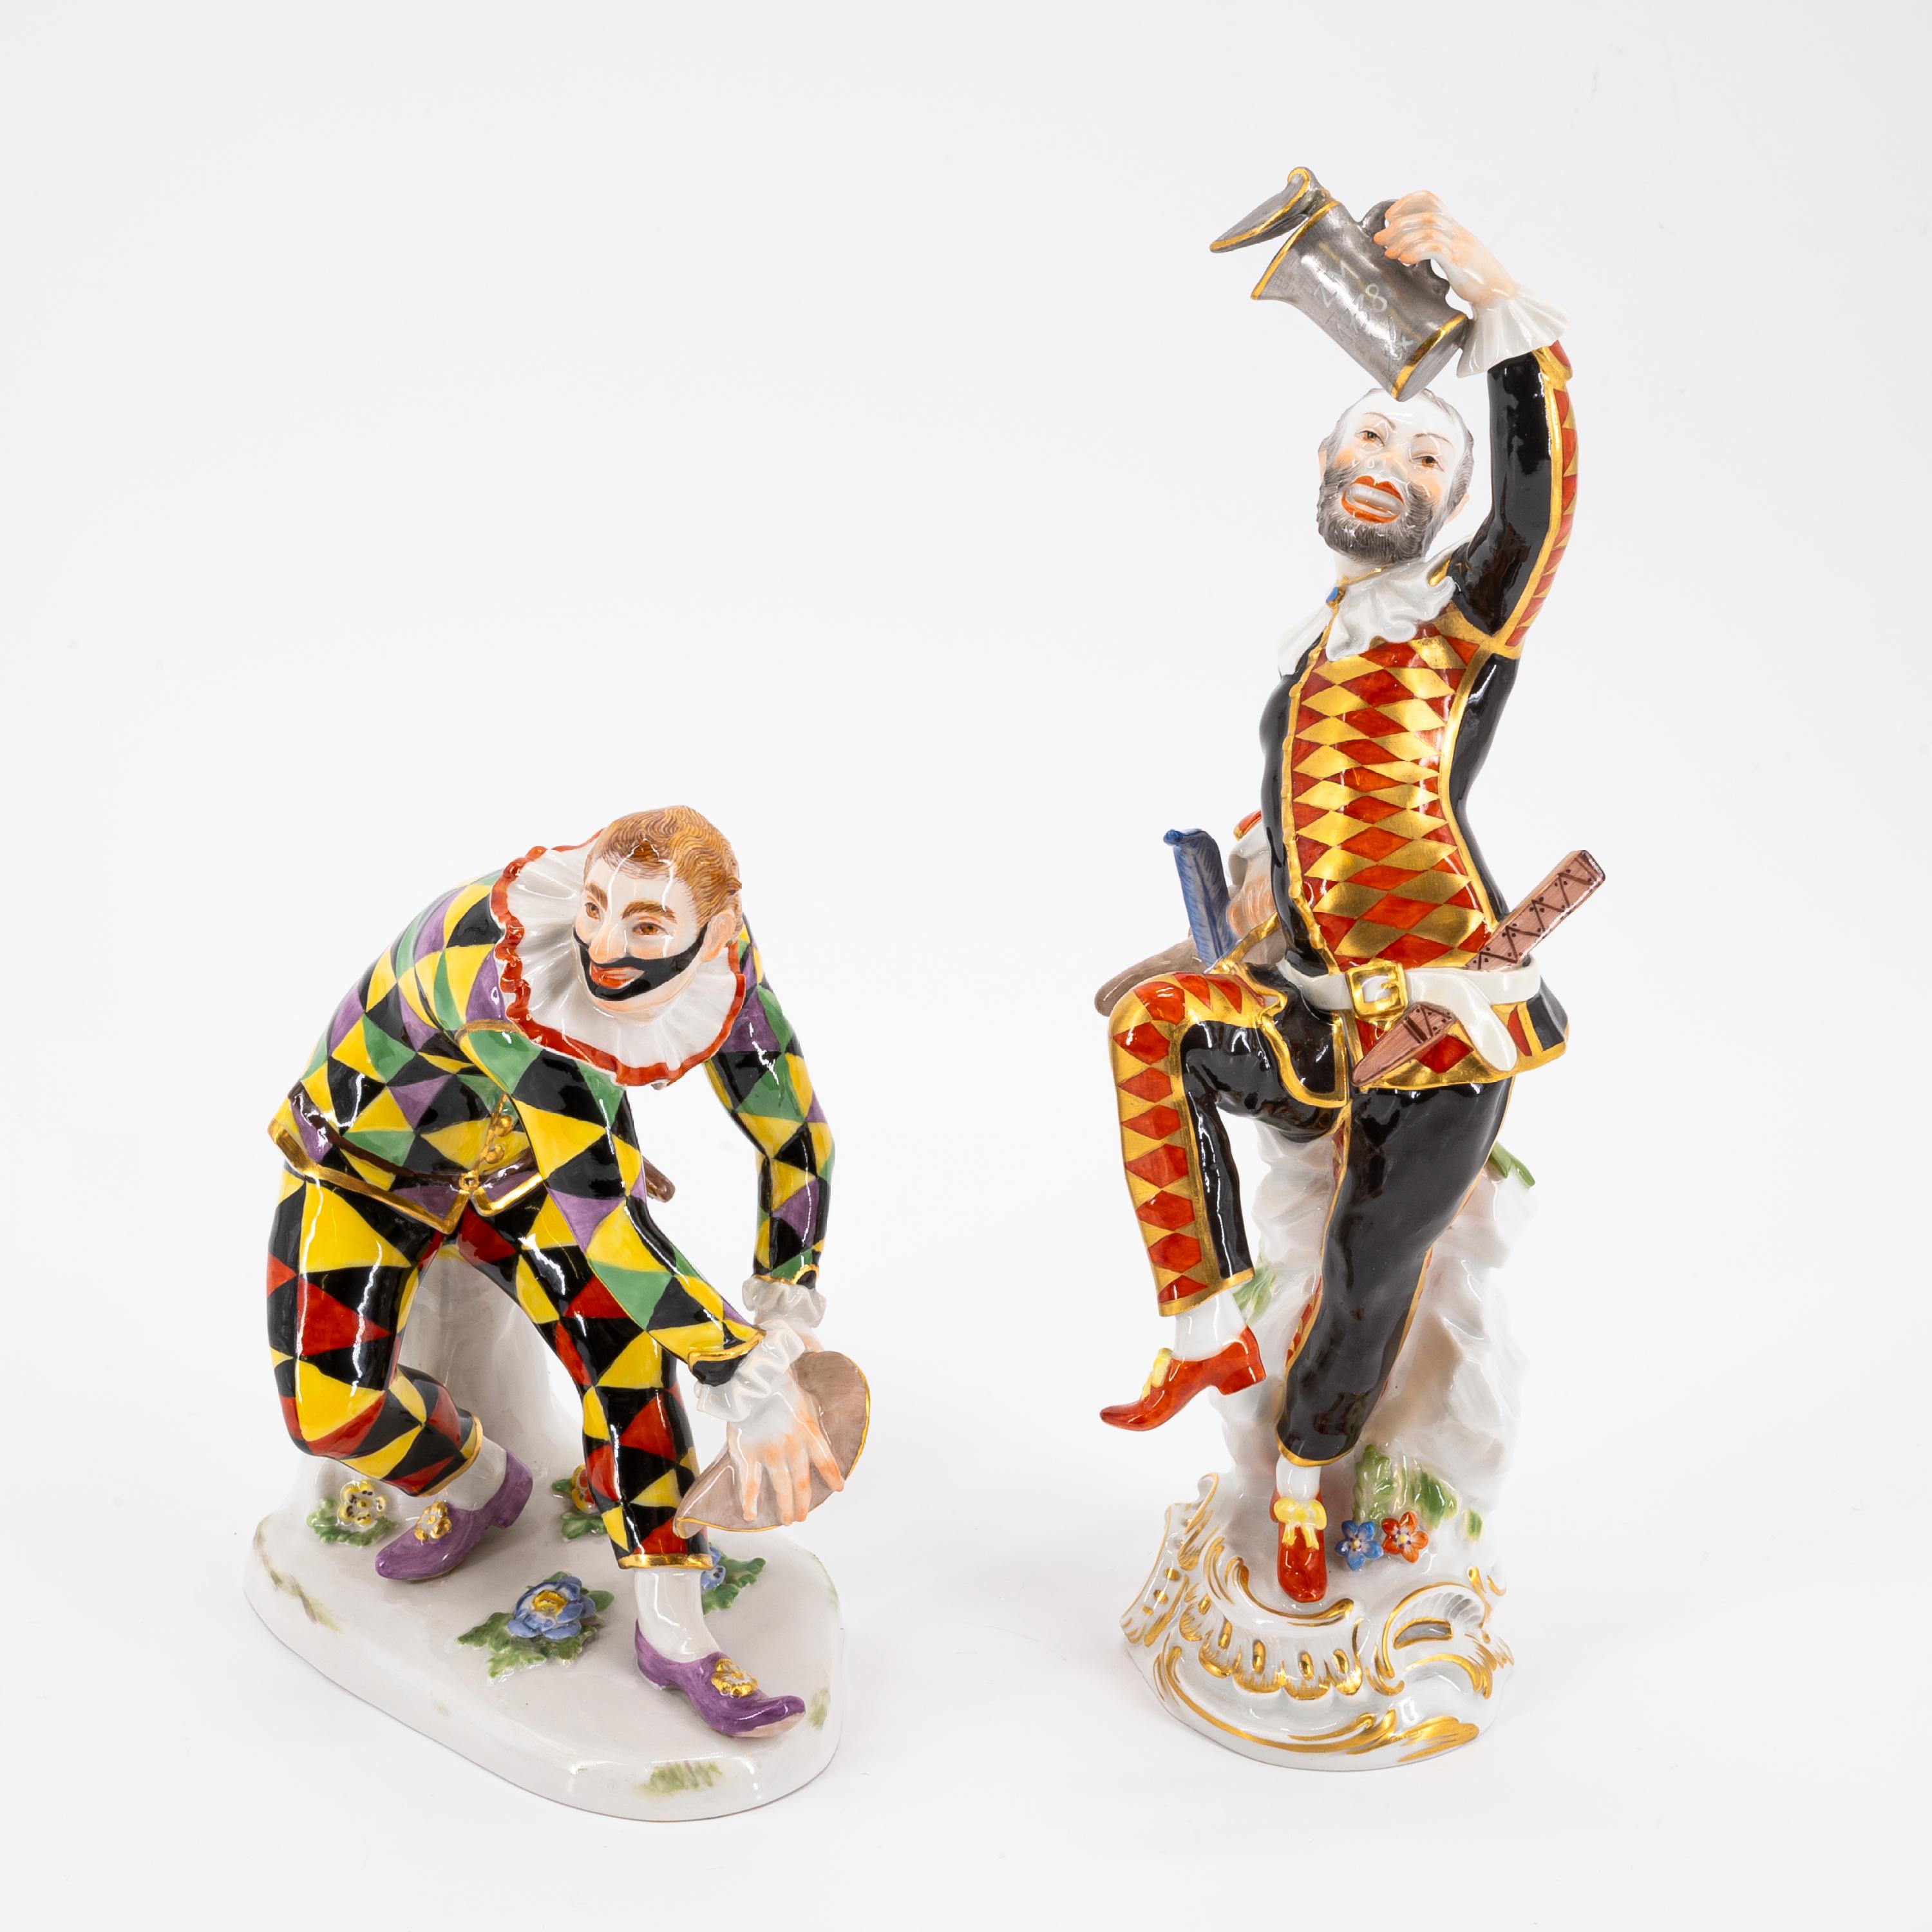 FOUR LARGE AND THREE SMALL PORCELAIN FIGURINES FROM THE COMMEDIA DELL'ARTE - Image 5 of 10